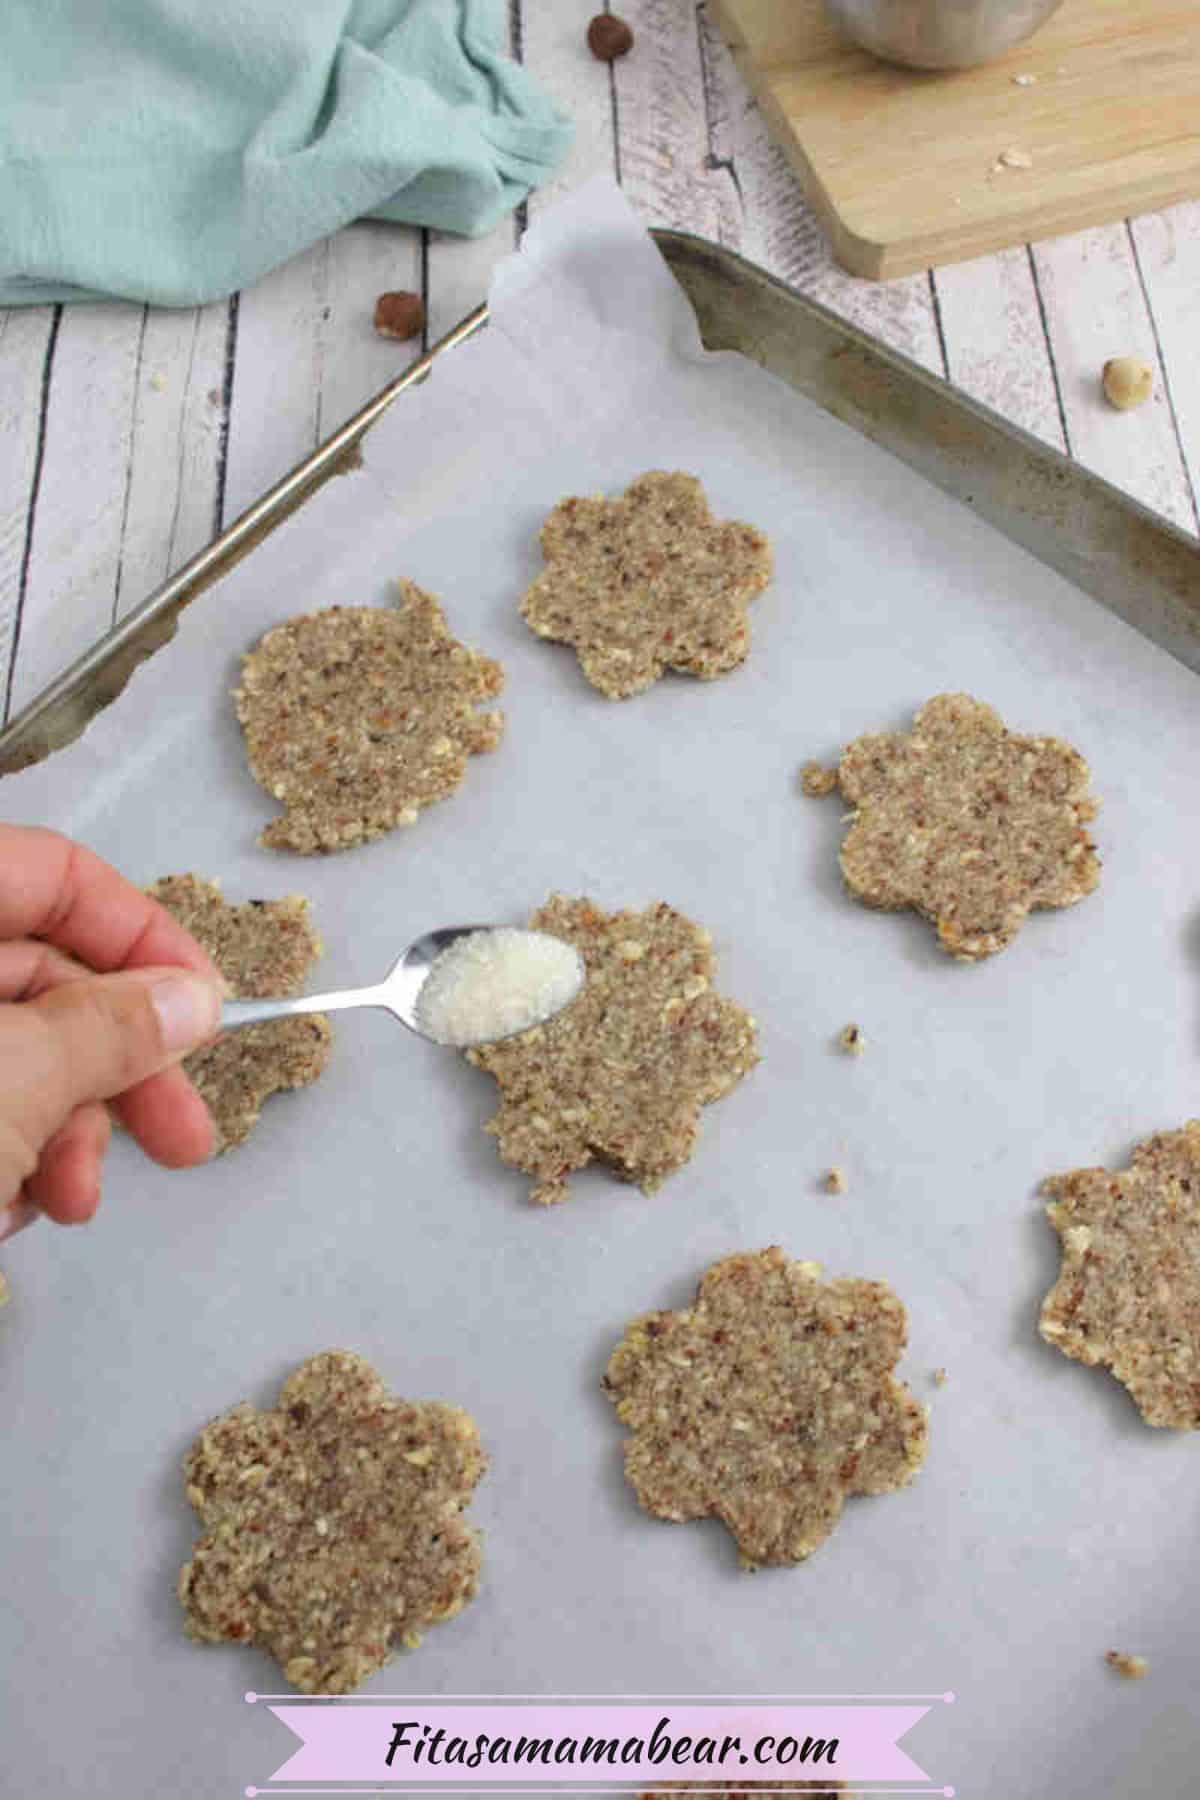 Sugar being sprinkled on raw cookies on a baking tray.